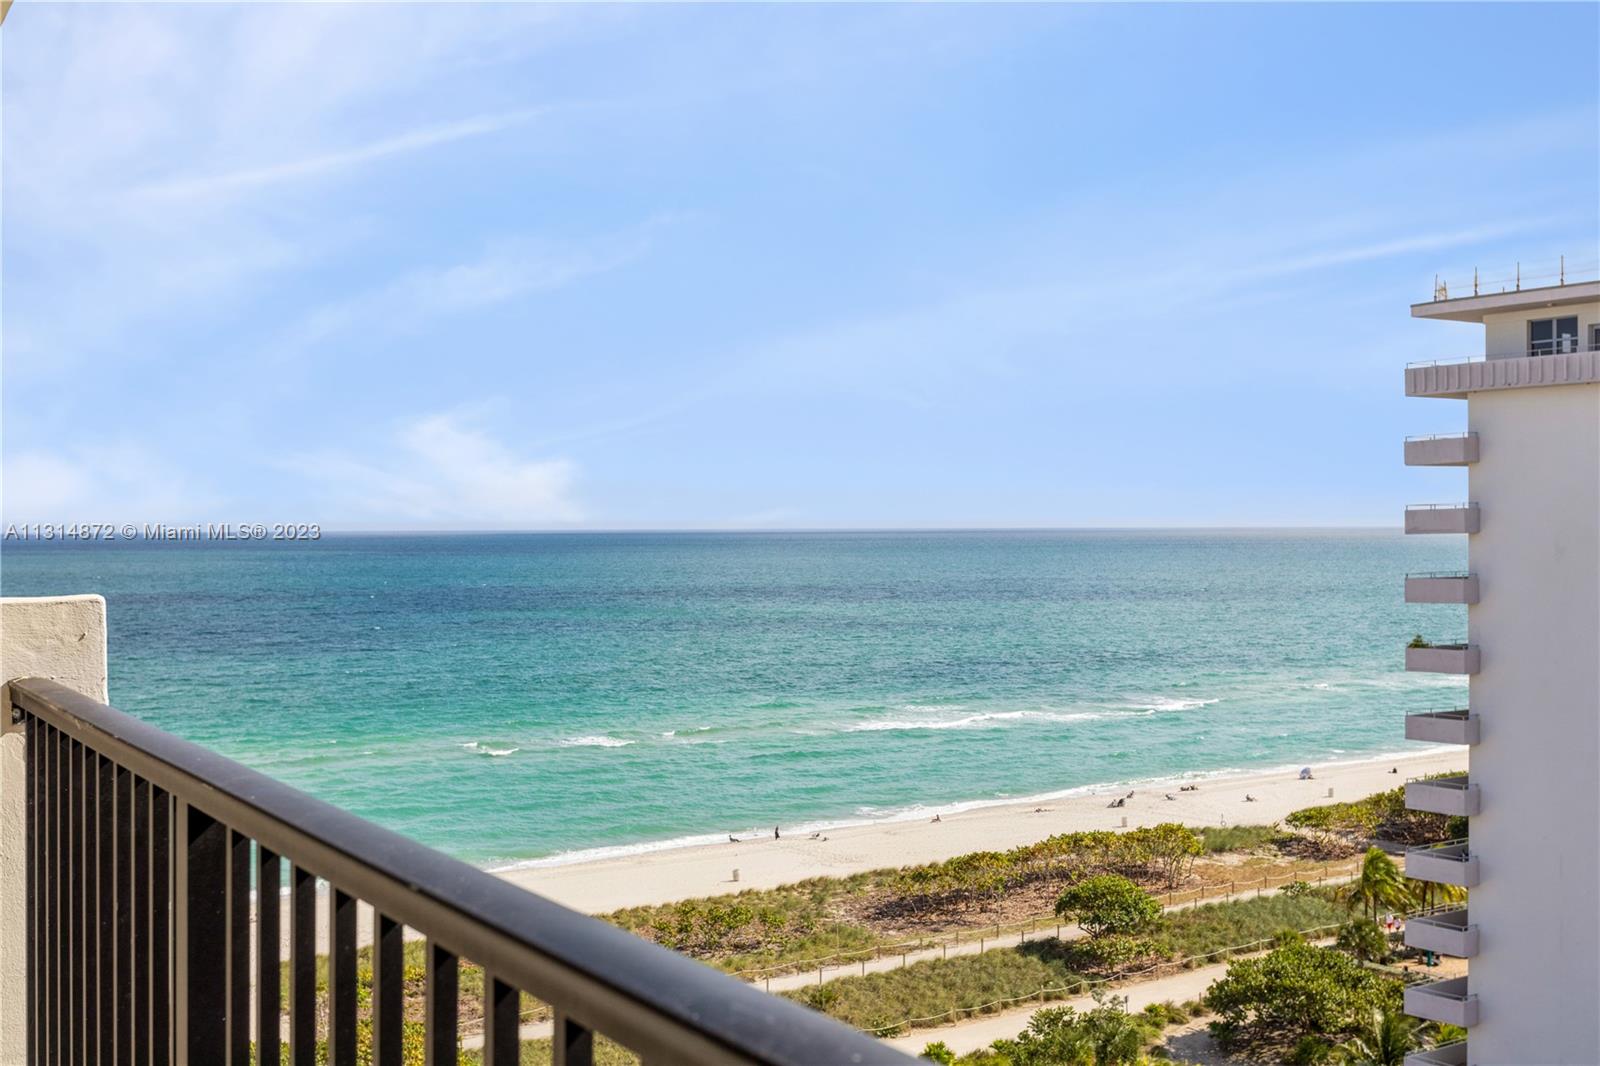 Enjoy the fantastic ocean views from this furnished Penthouse with 1 bedroom and 2 full baths in Surfside, ready for move-in. This spacious unit also has a den that can be easily converted into an office. Washer & Dryer inside the unit. Have direct access to the beach while enjoying the building amenities, which include a pool, gym, community room, and more. Be within walking distance of Publix, restaurants, the post office, and Bal Harbour shops.